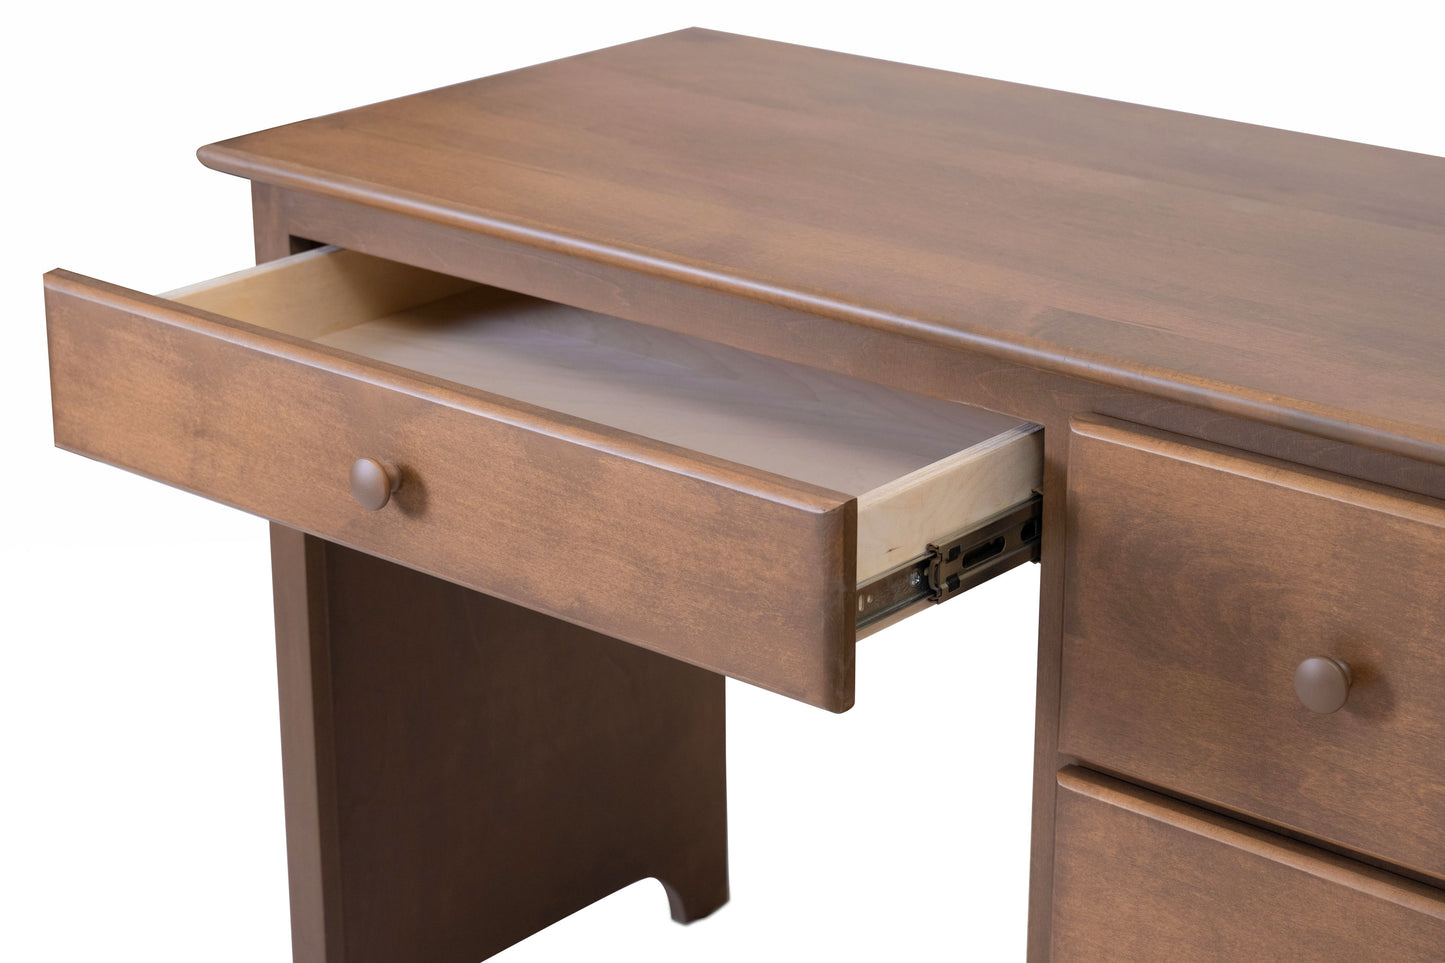 Acadia Shaker Student Desk shwon with wide drawer open to show storage space.